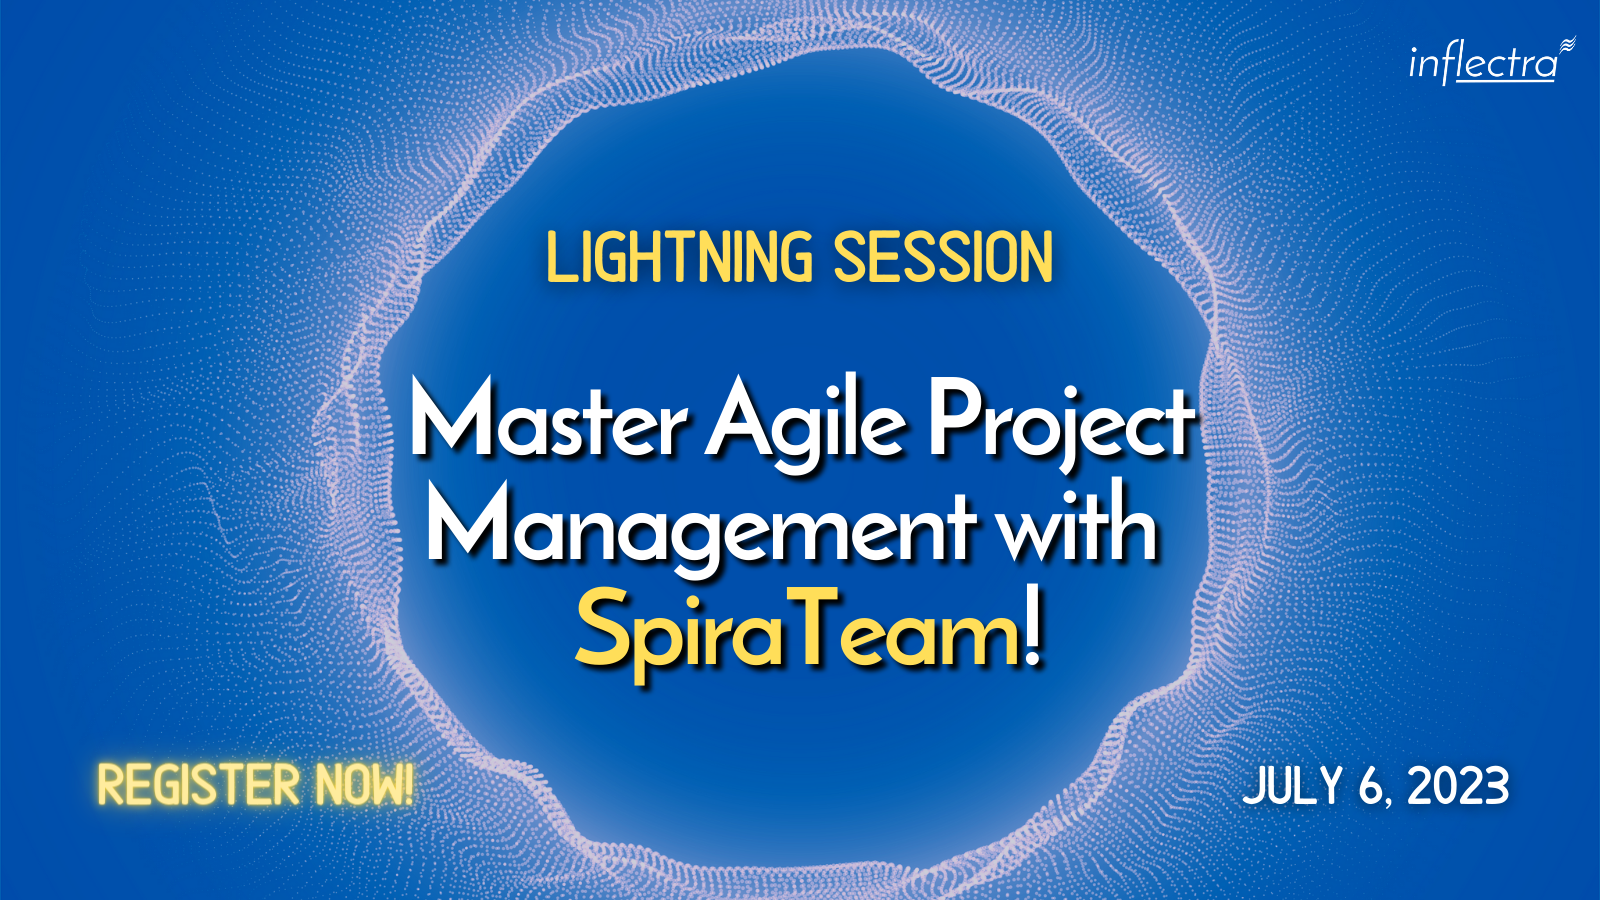 lightning-session-master-agile-project-management-with-spirateam-image